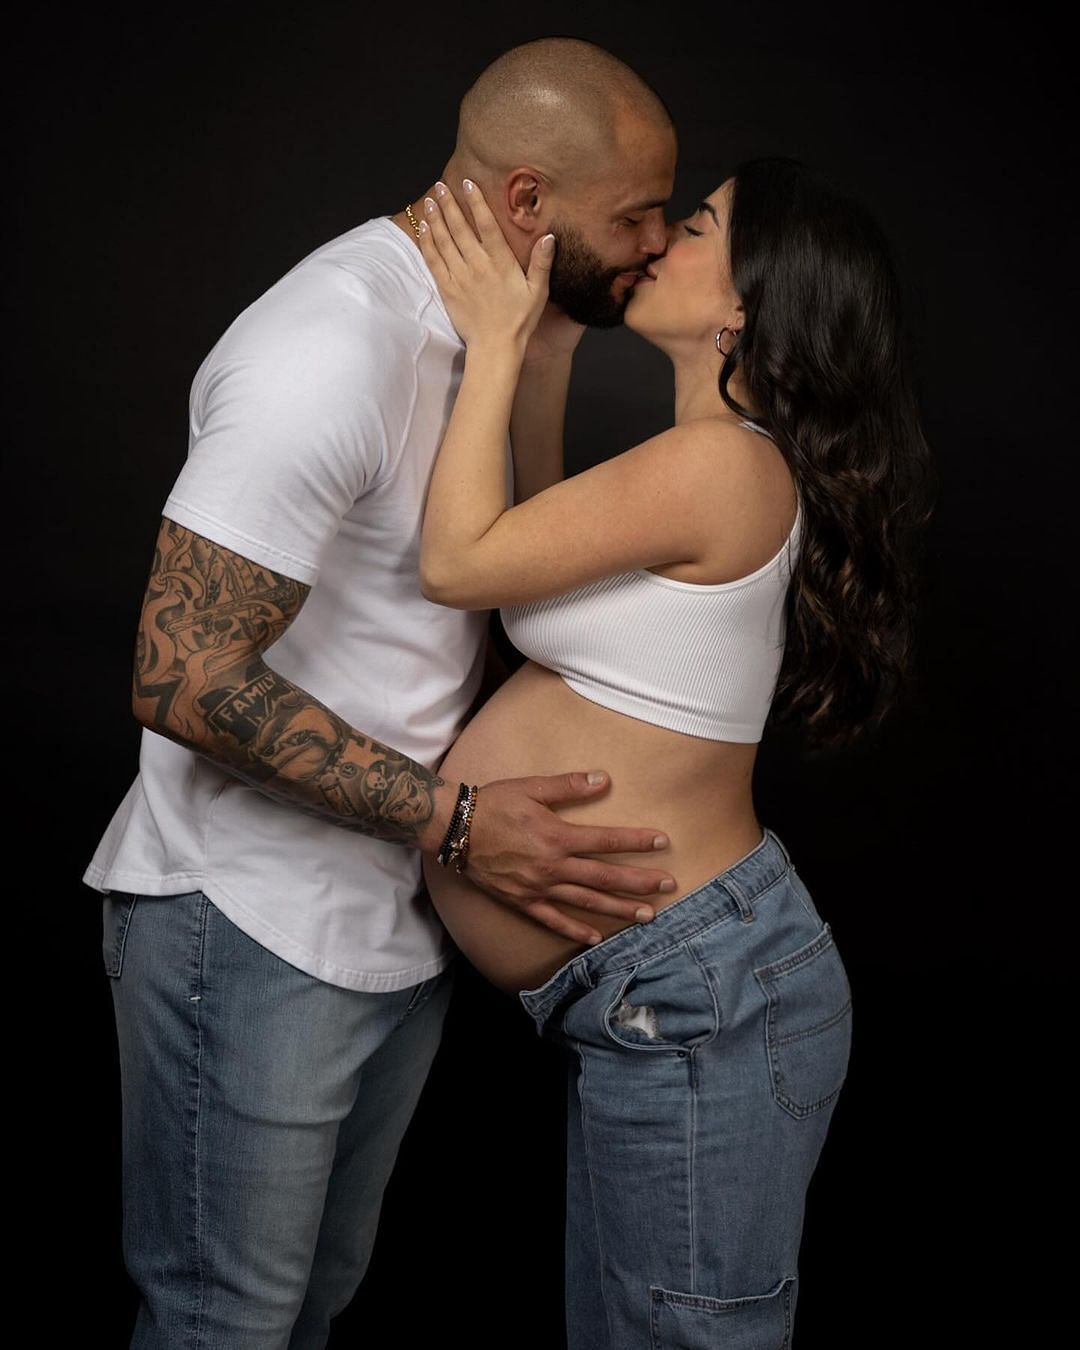 Prescott and Ramos share a kiss while holding her belly